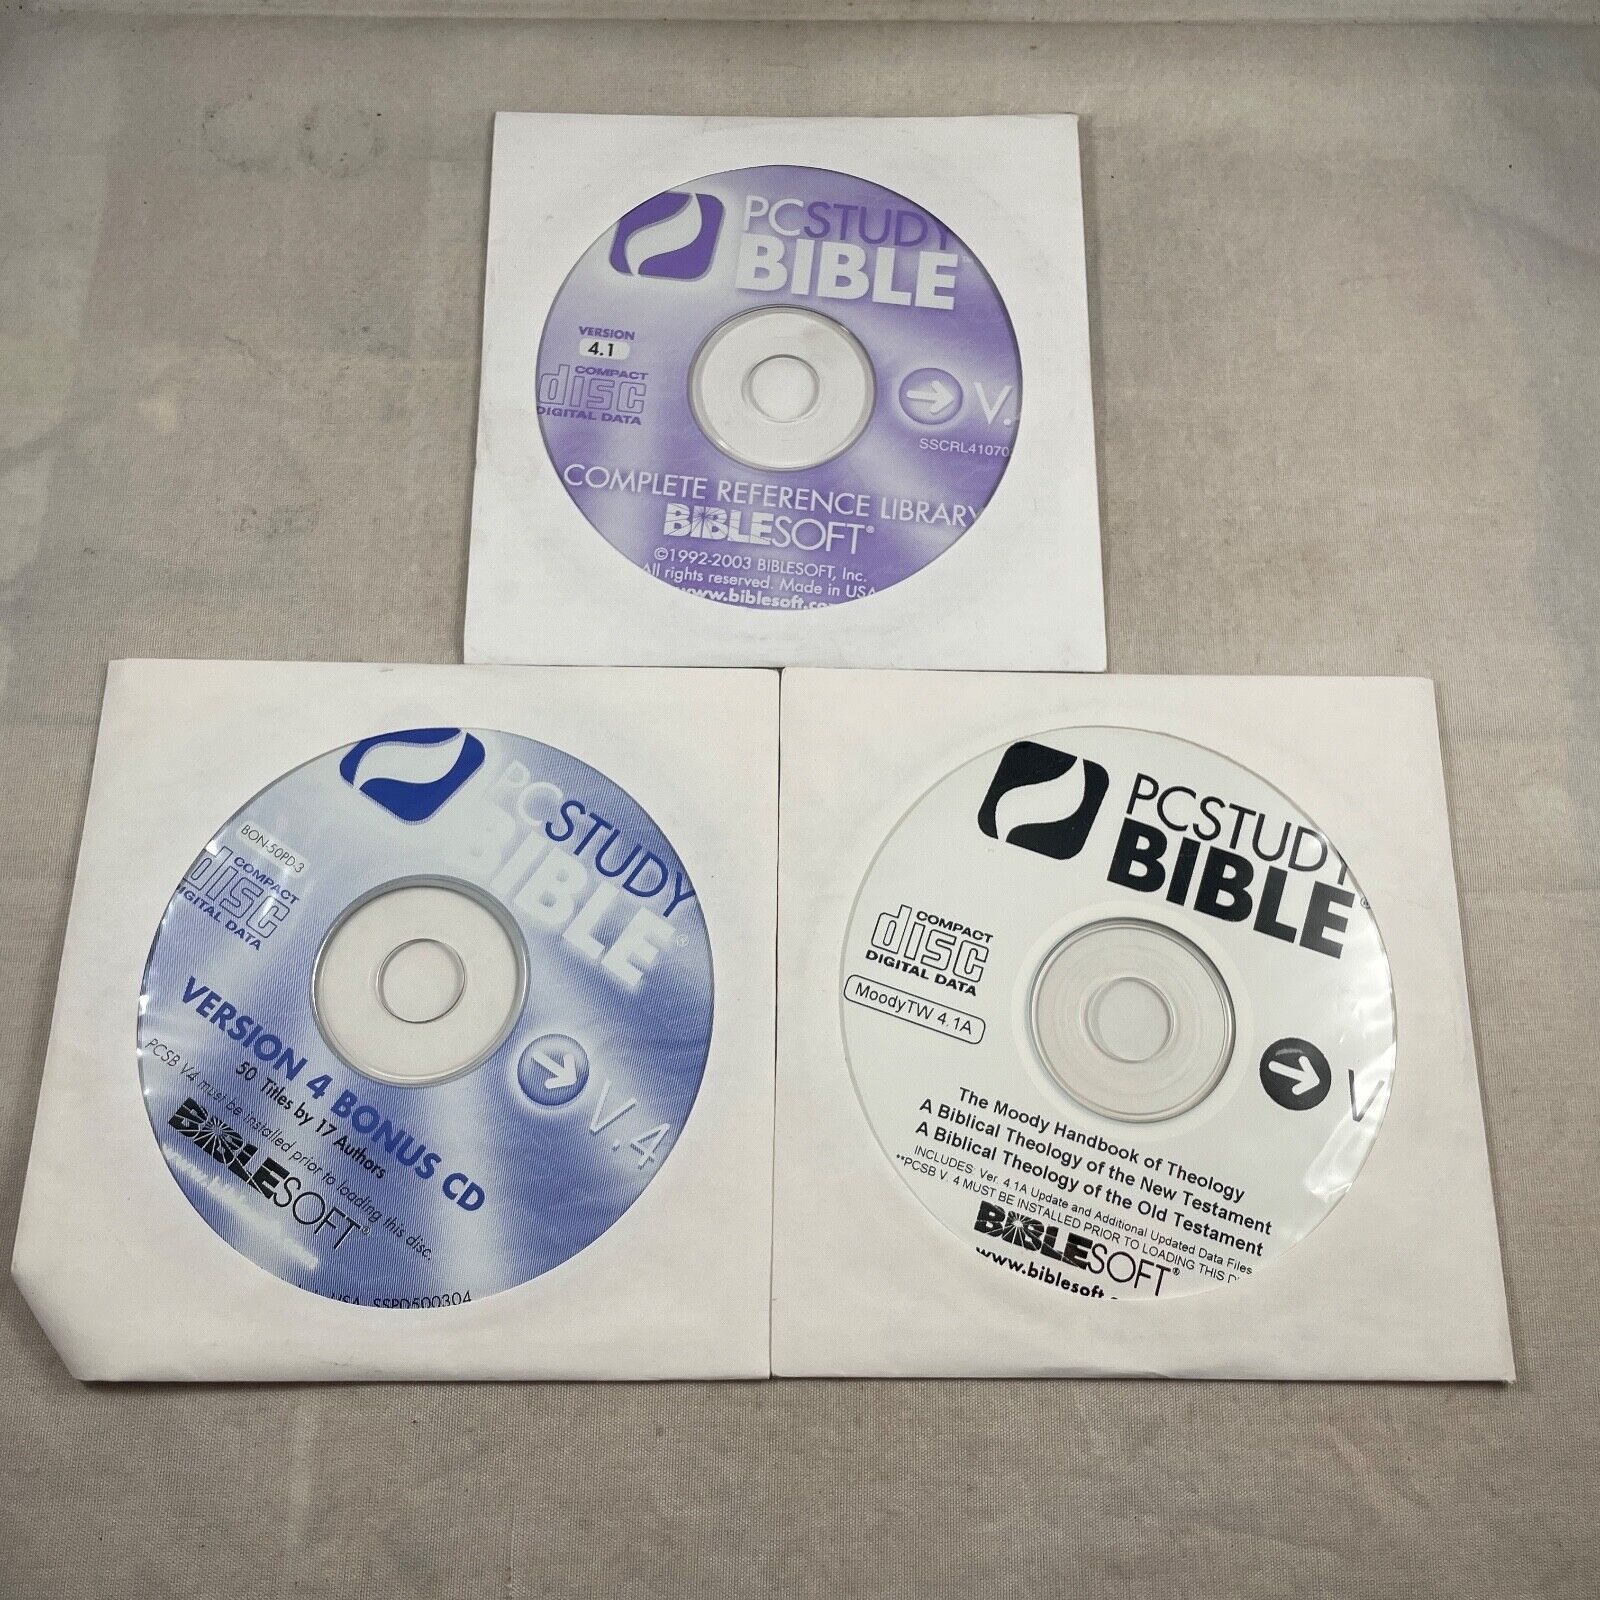 Biblesoft PC Study Bible Complete Reference Version 4 Windows Lot 3 Disc Set CD